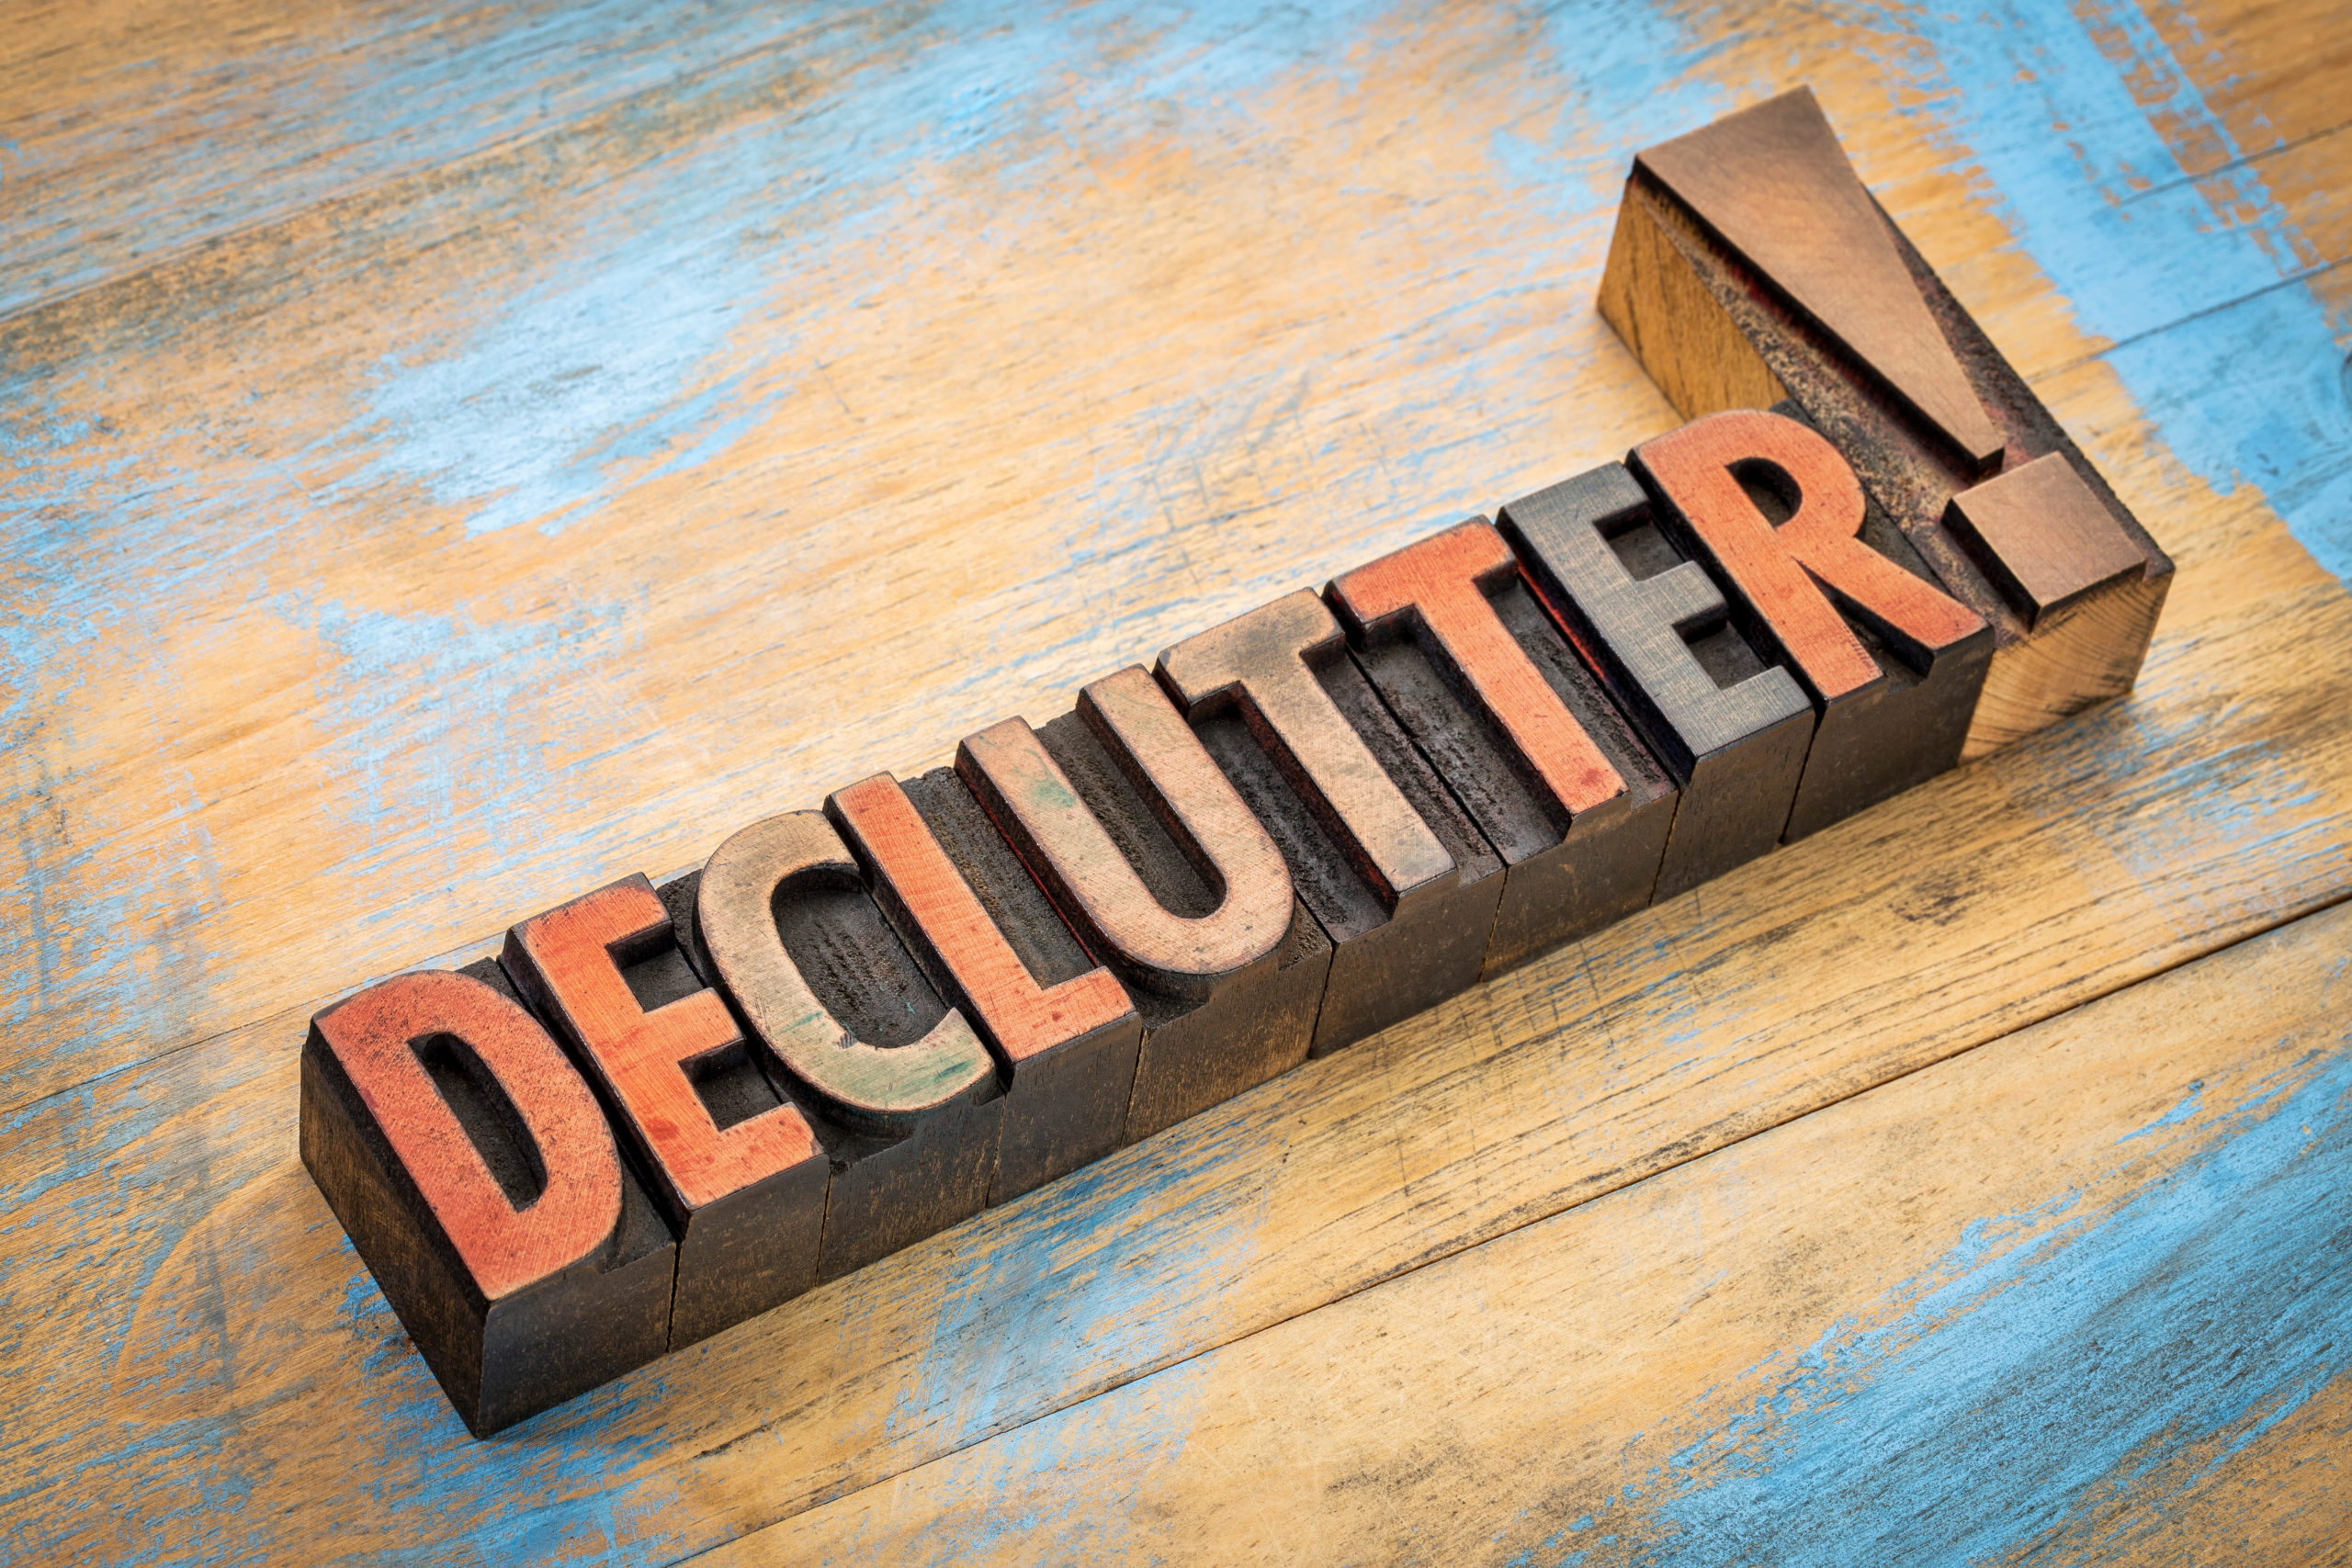 Wood block spelling out "Declutter!" on a wooden surface.